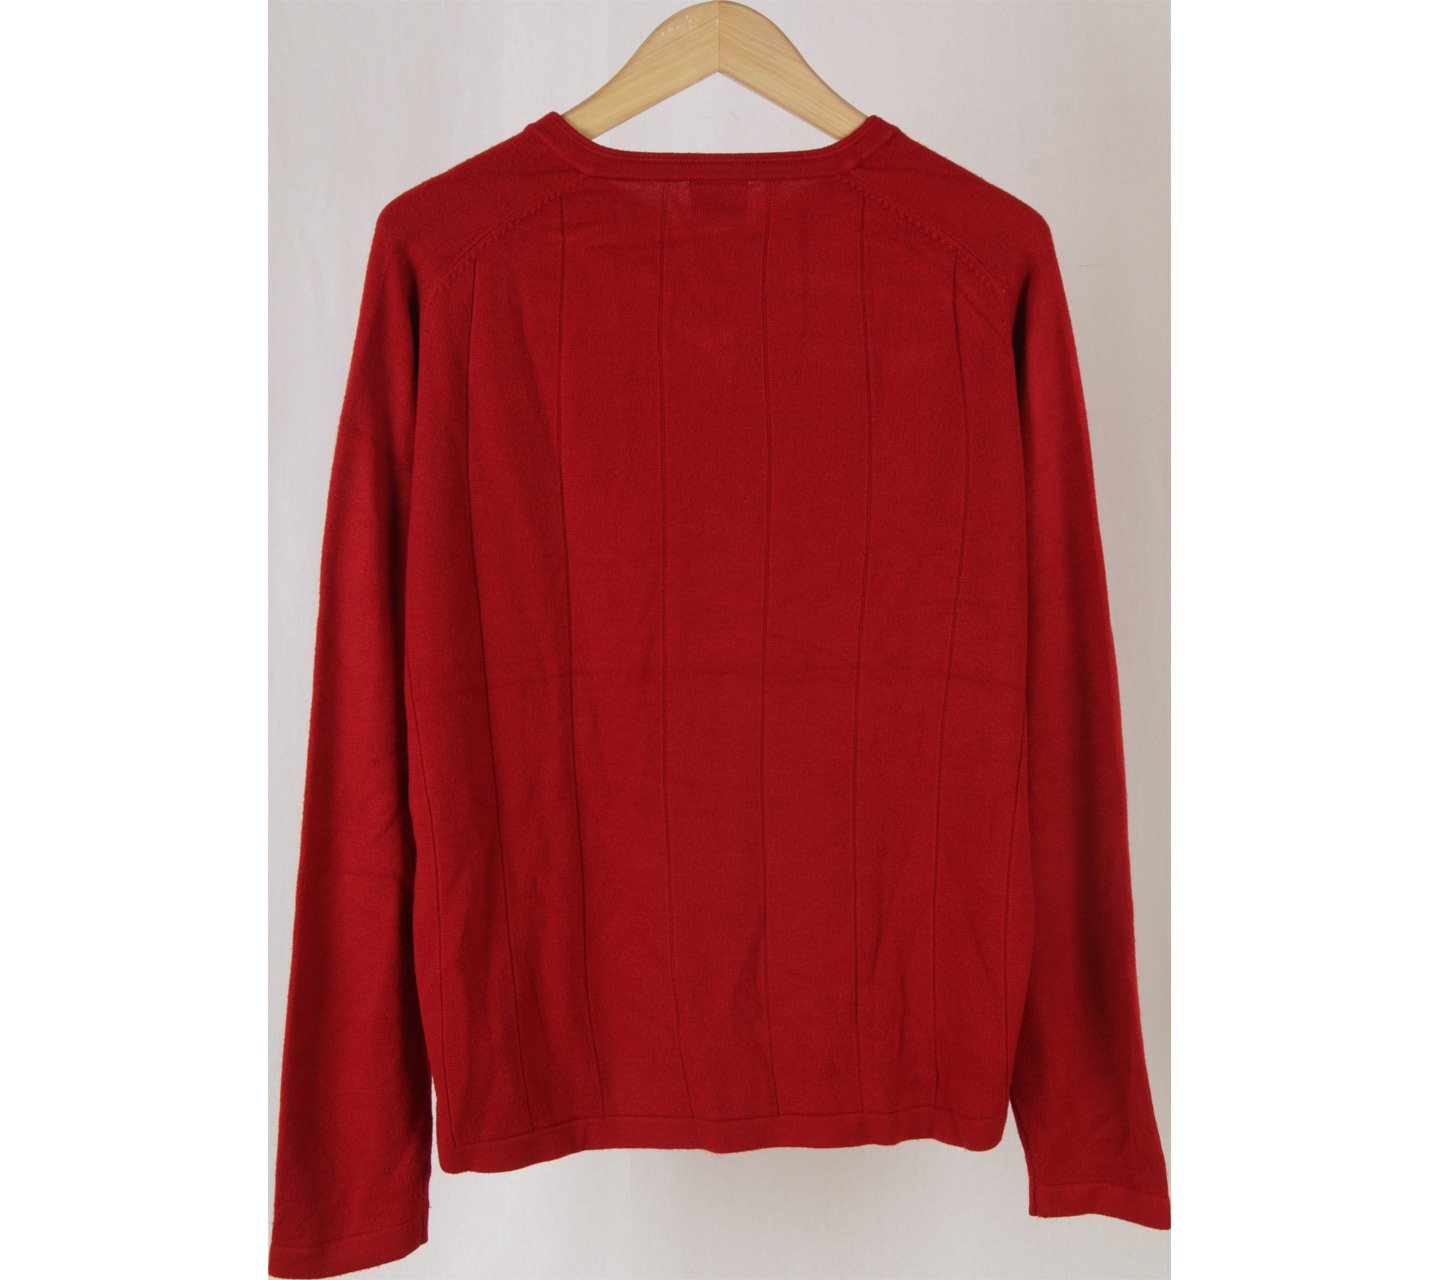 Next Red Knit Sweater